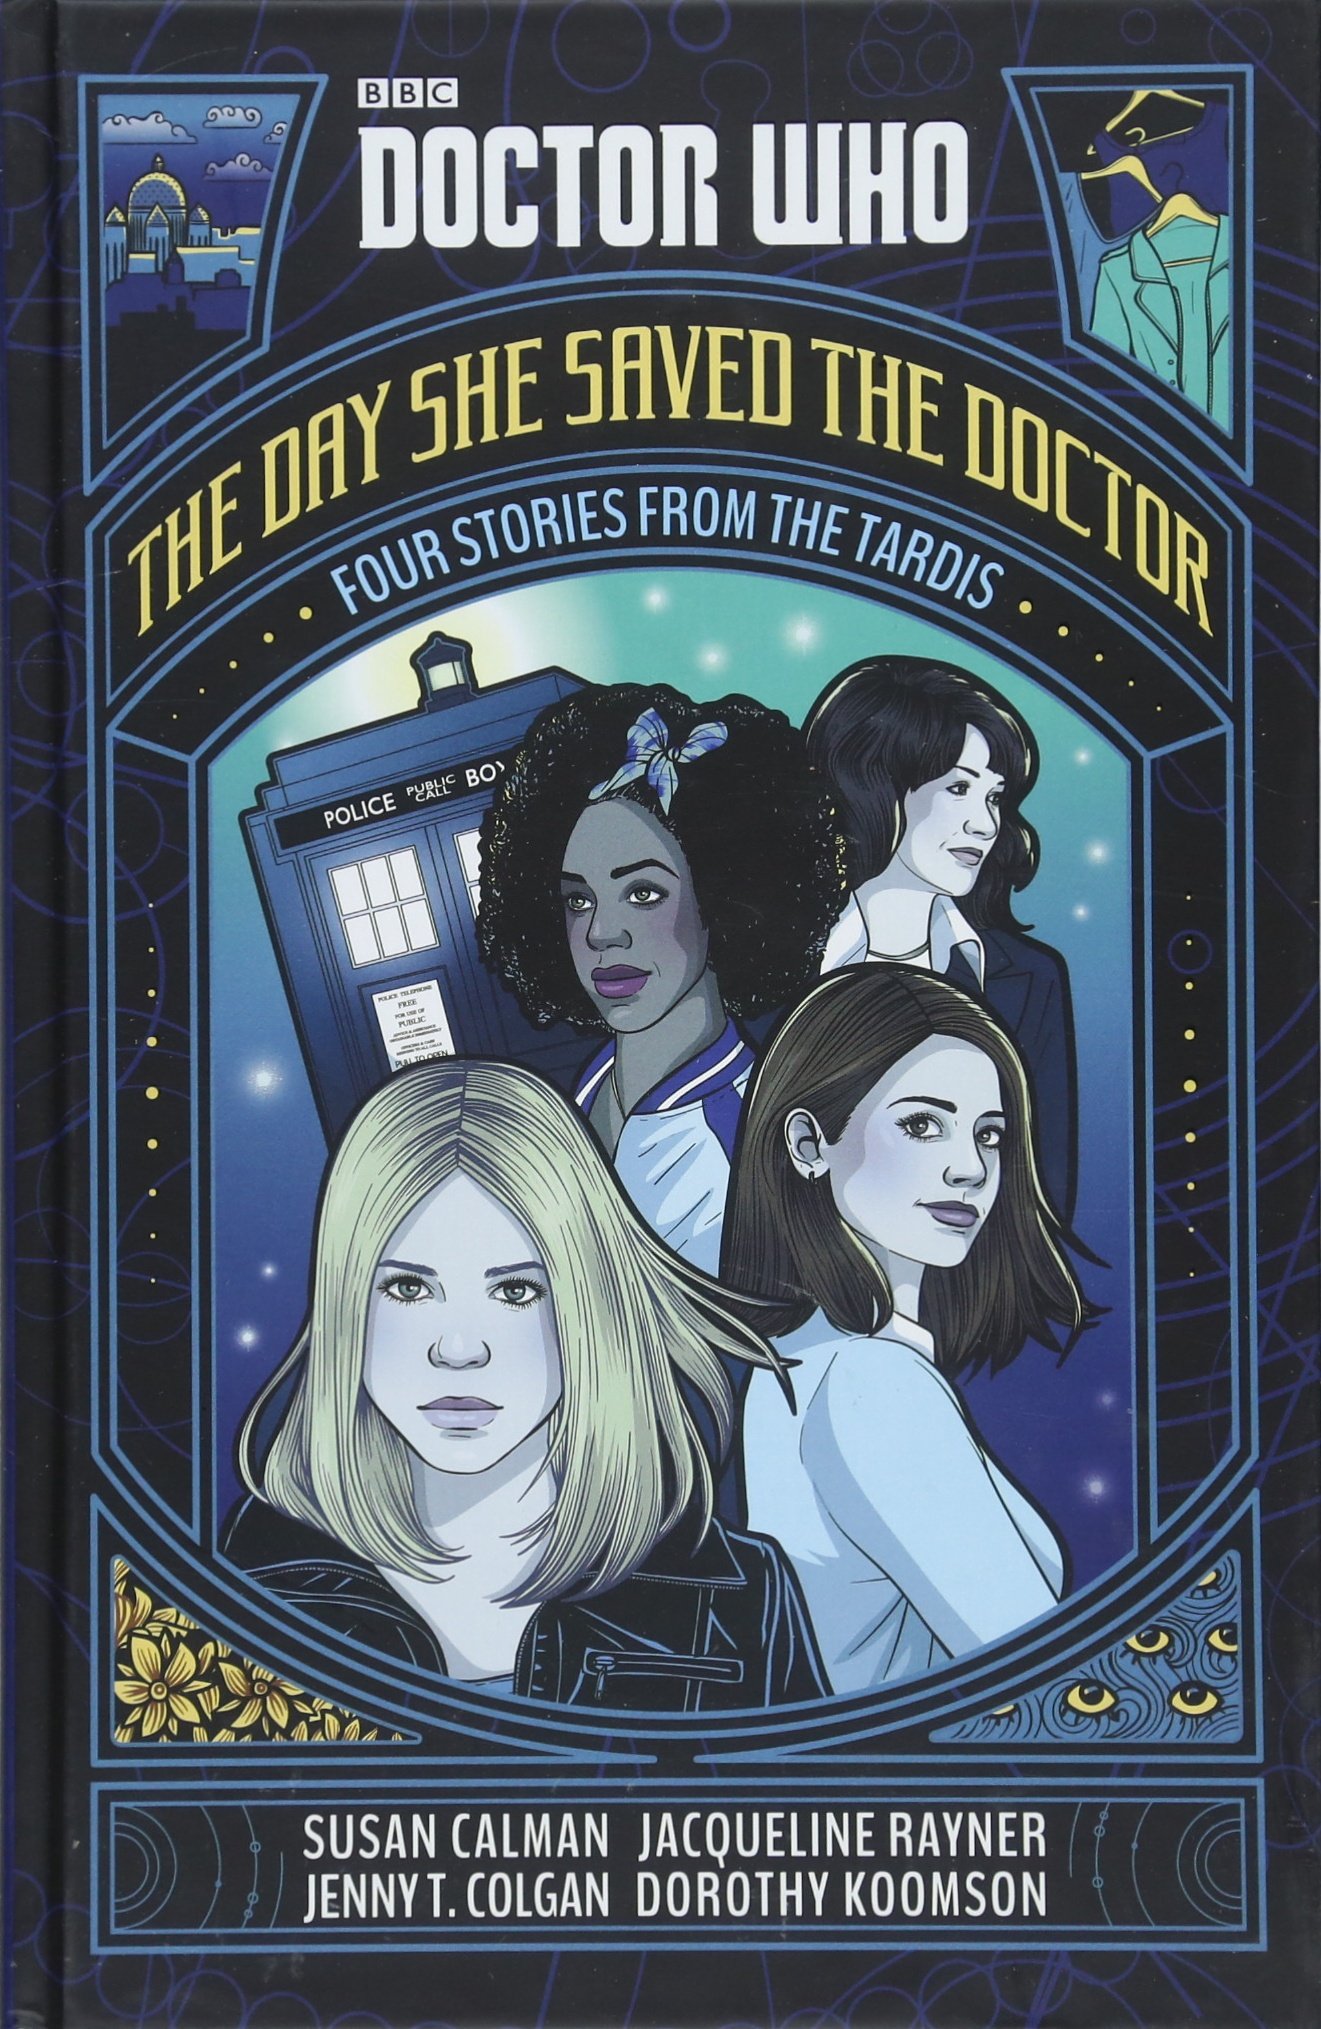 The Day She Saved The Doctor: Four Stories from the TARDIS